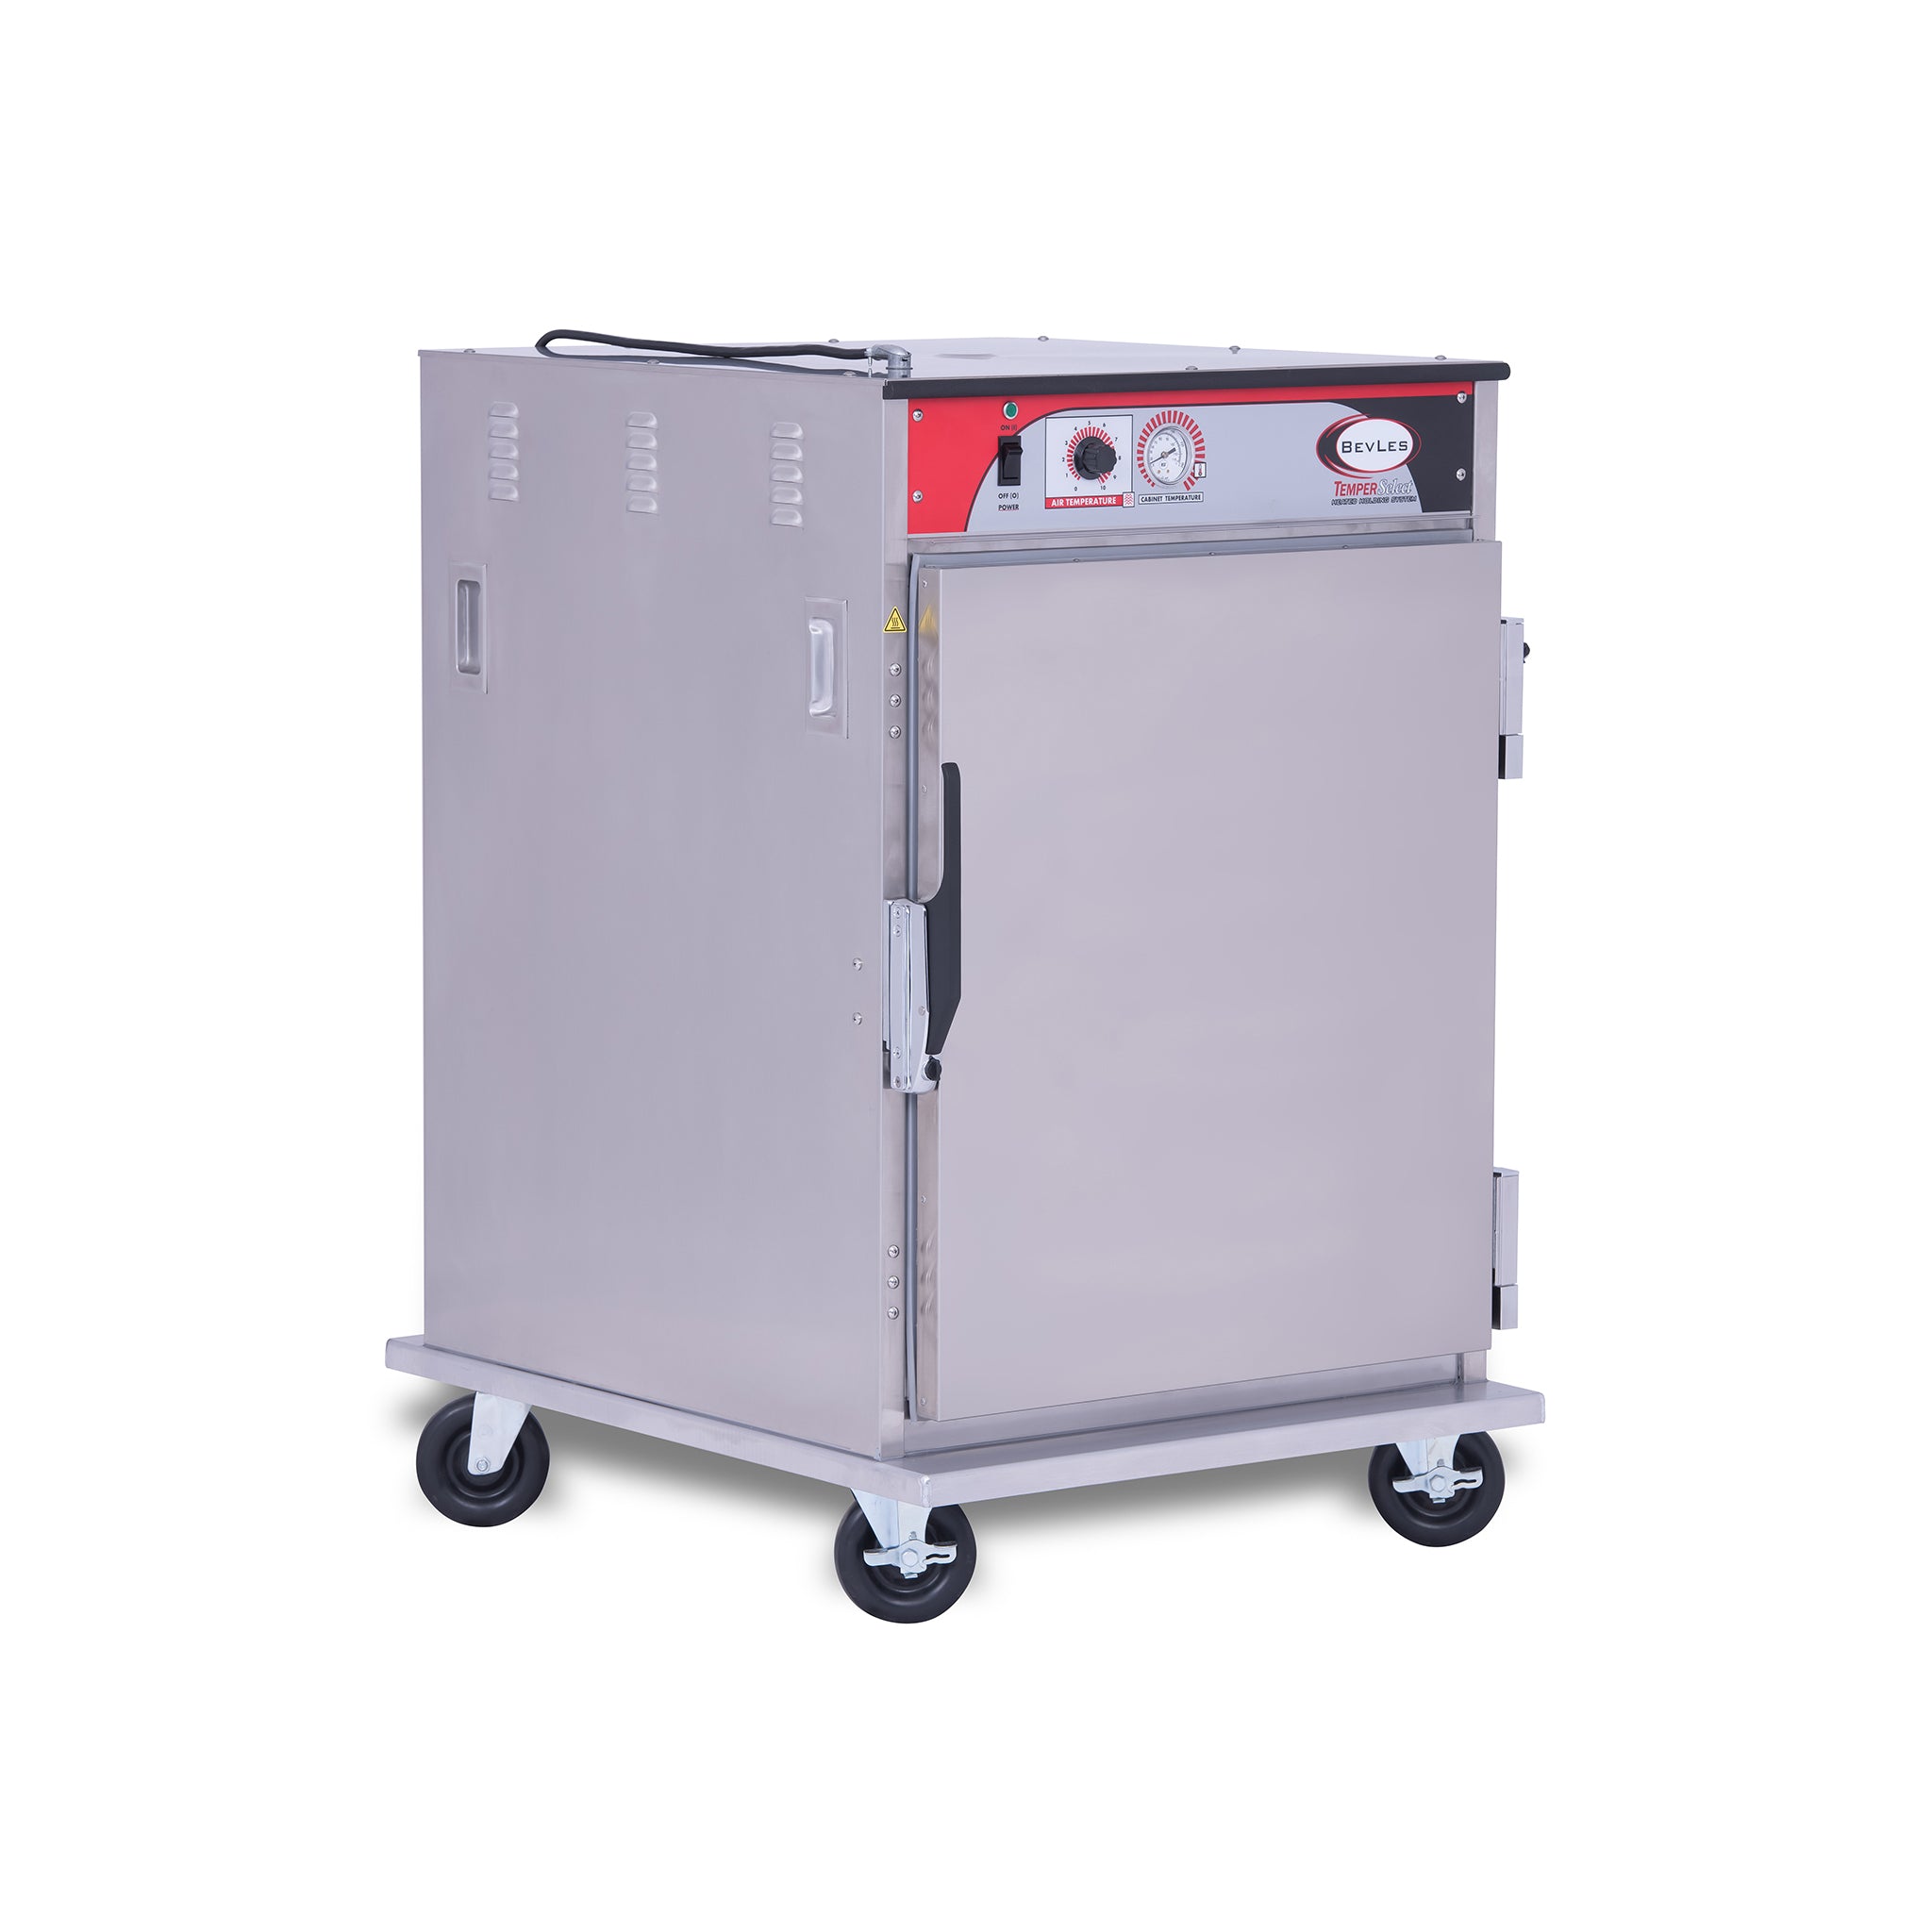 BevLes - HTSS44W64, BevLes Temper Select 1/2 Size Heated Holding Cabinet, Universal Width, 230V, in Silver